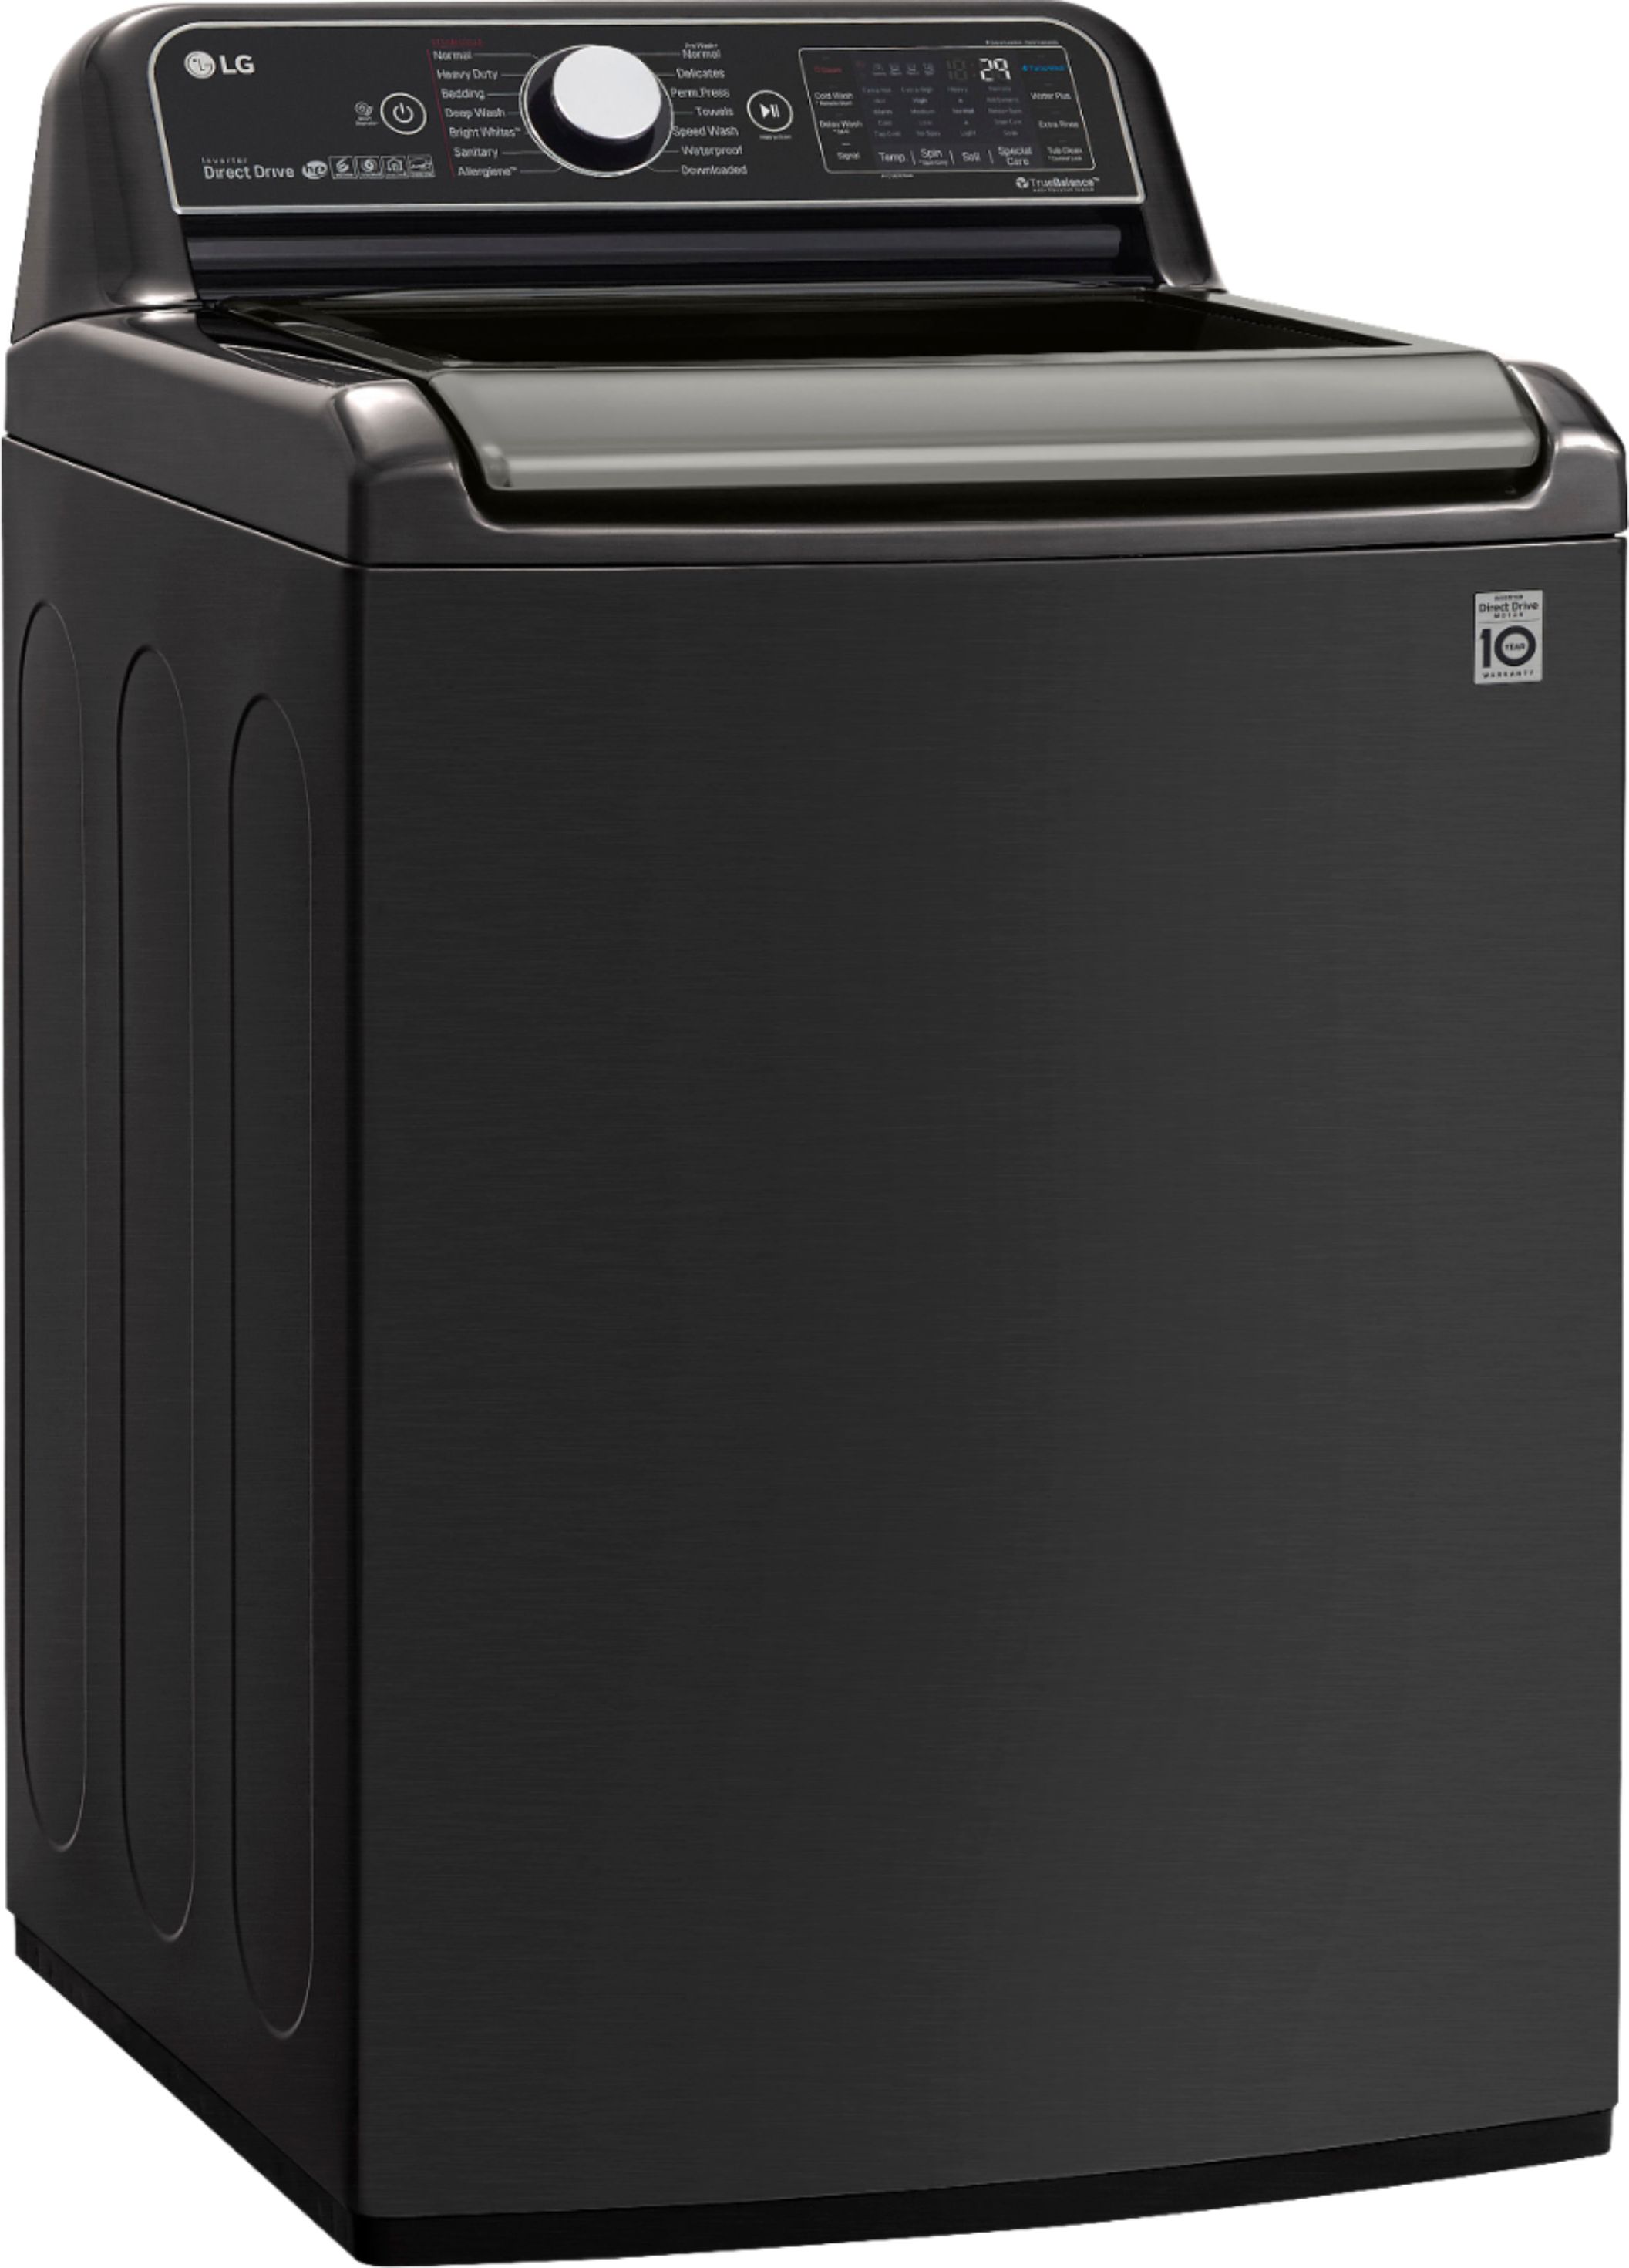 Angle View: LG - 5.5 Cu. Ft. High-Efficiency Smart Top Load Washer with Steam and TurboWash3D Technology - Black Steel